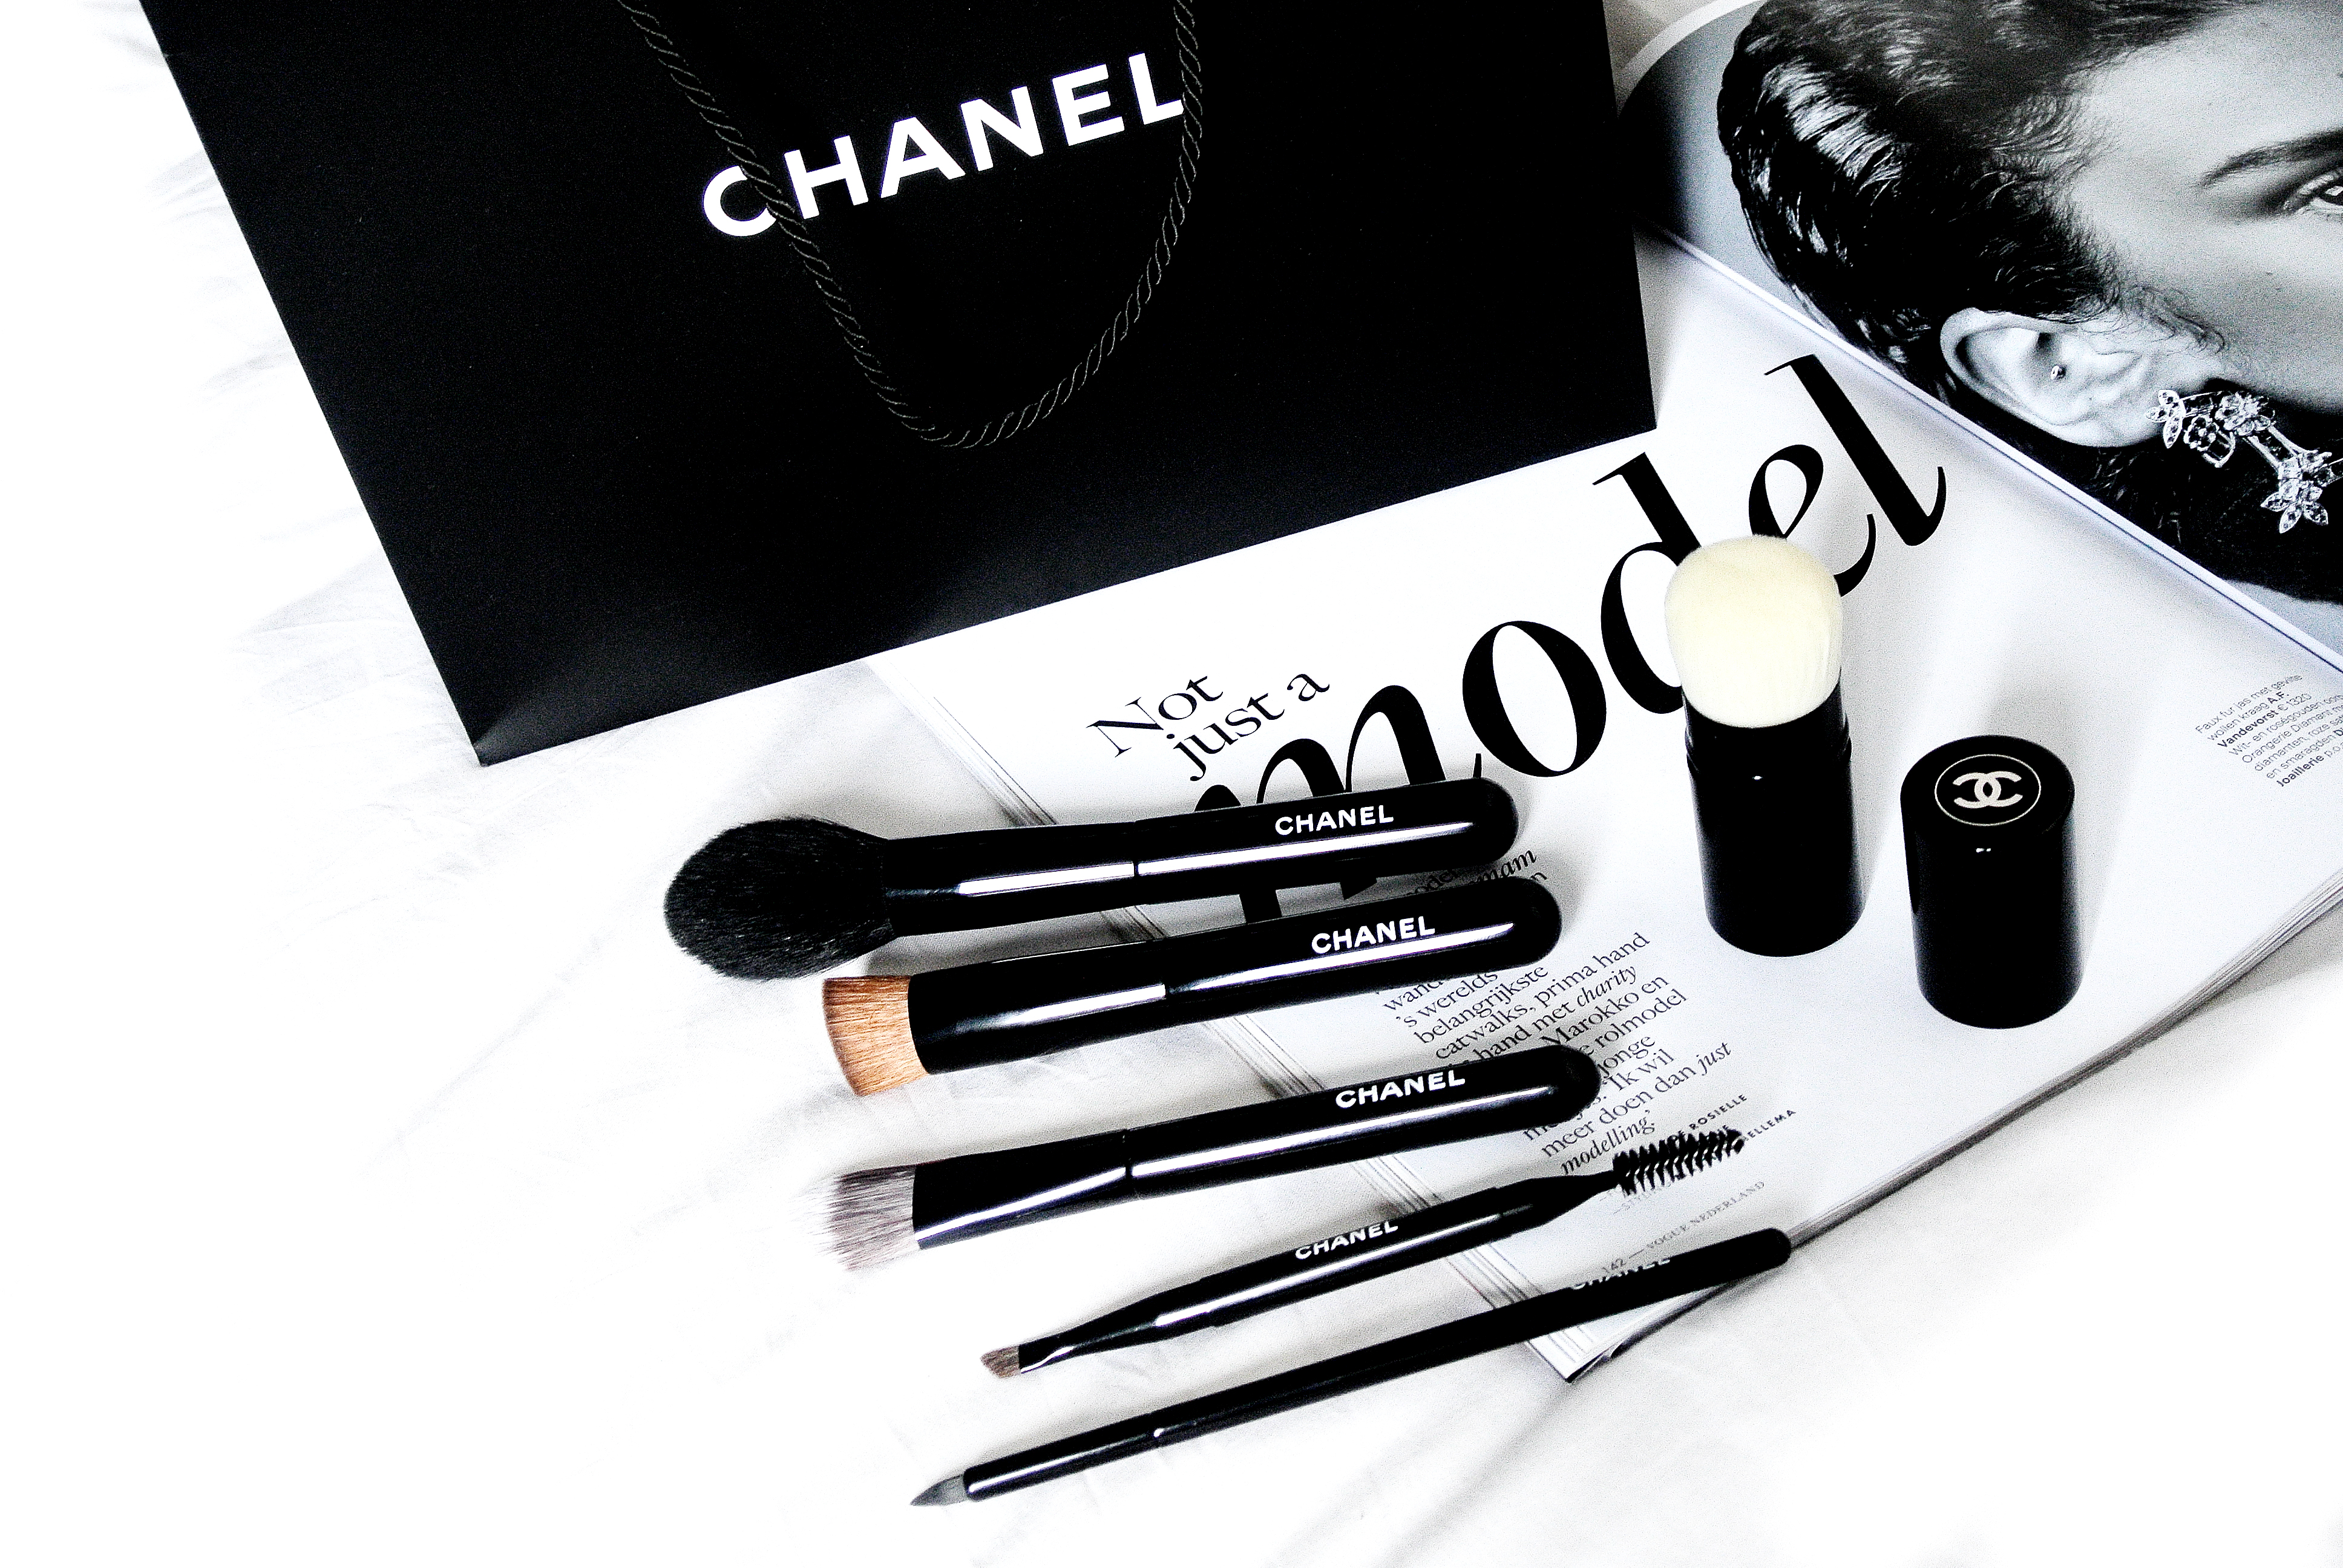 Review CHANEL Les Pinceaux collection 2017 (make-up brushes